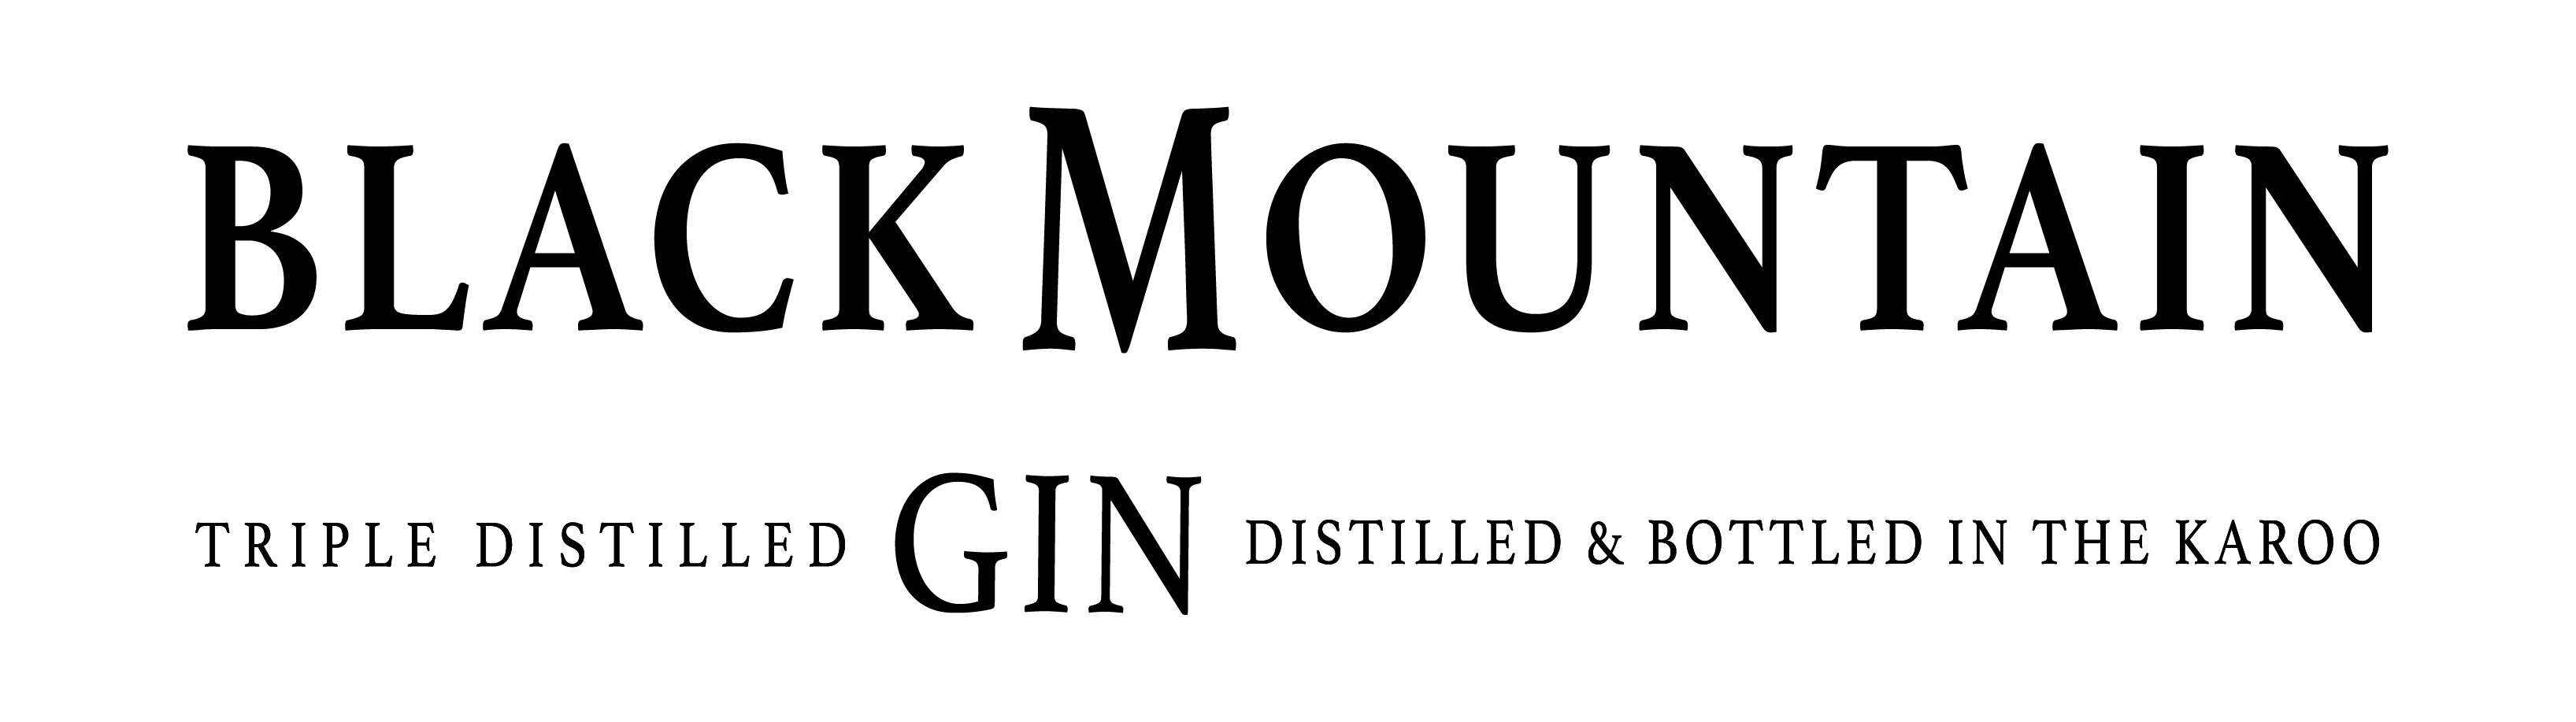 Black Mountain Logo - Black Mountain Gin - Crafted with the fine ingredients offered by ...